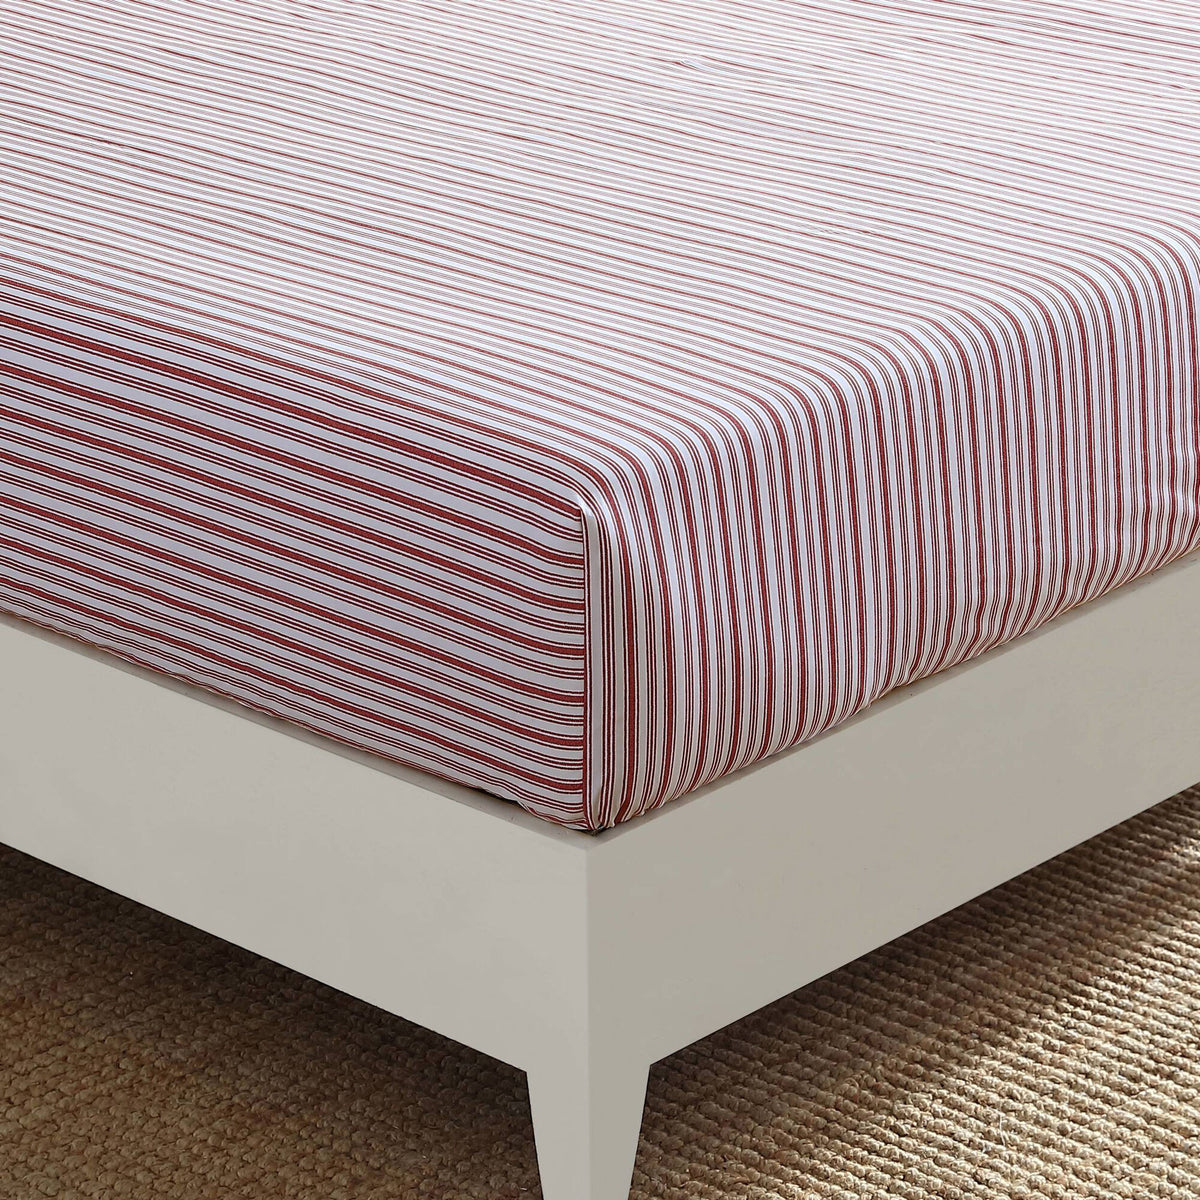 Nautica Coleridge Striped Red Full Fitted Sheet Pale Orchid